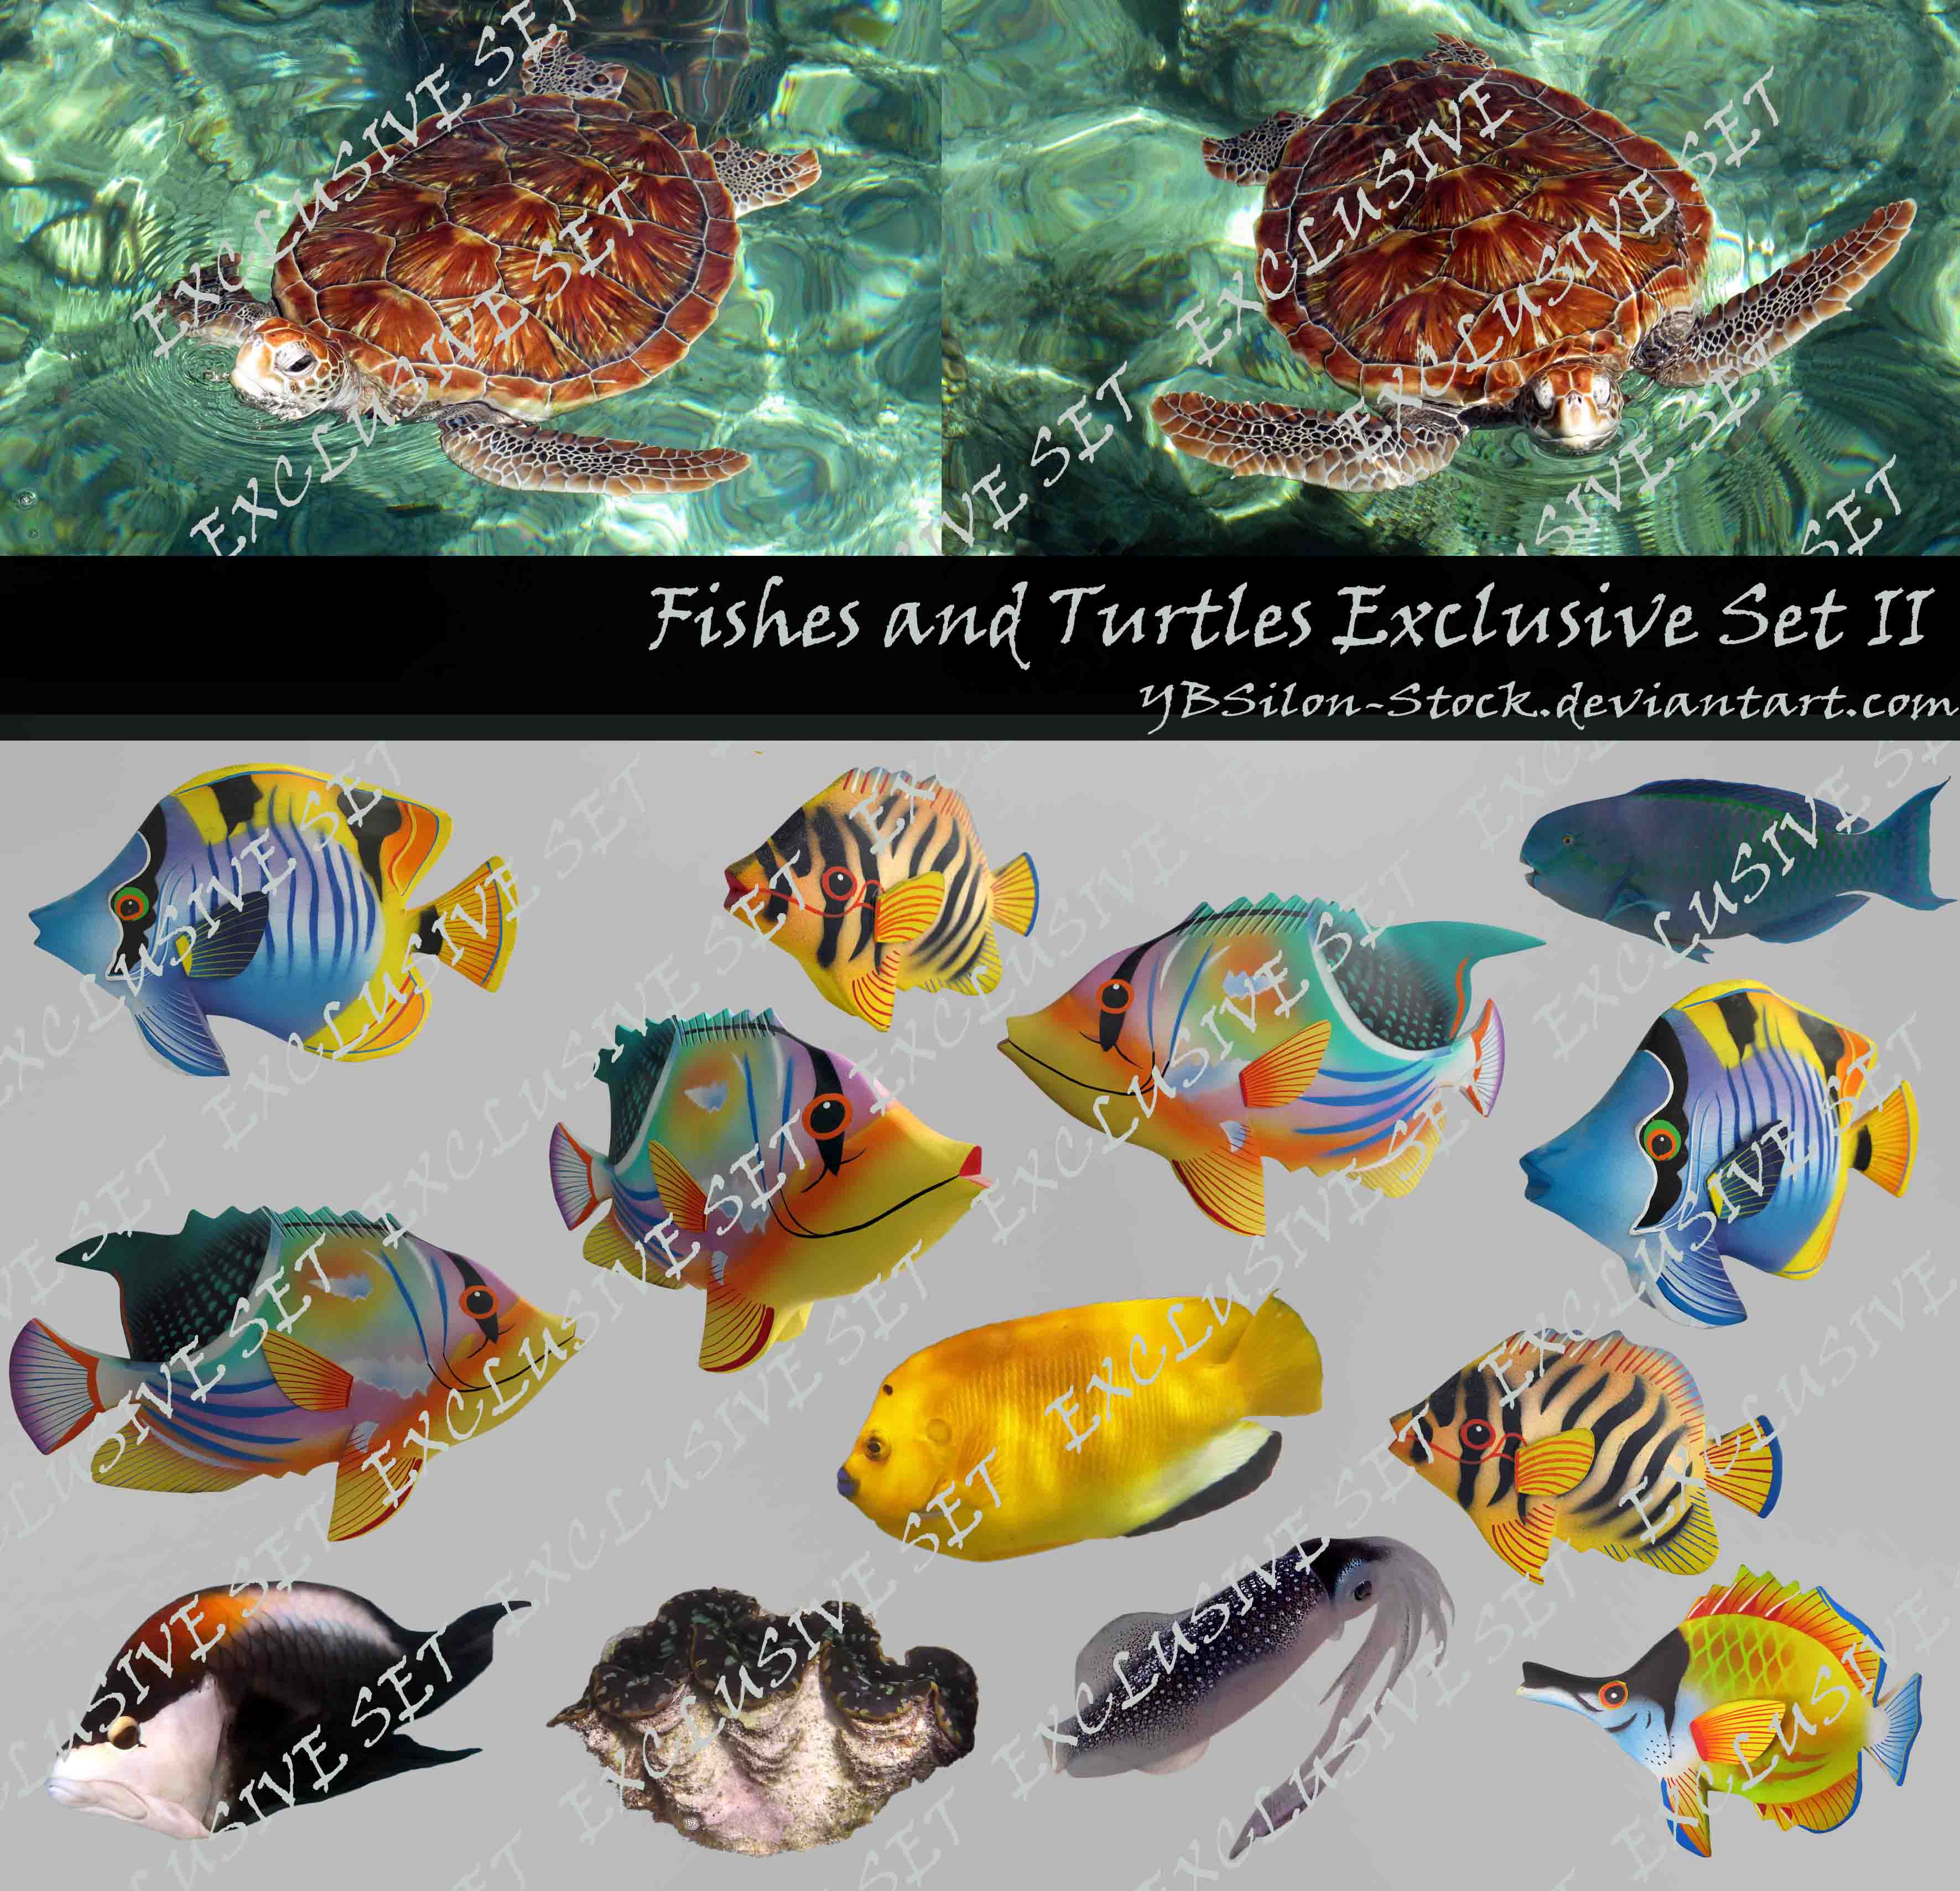 Fishes and Turtles Exclusive Set II